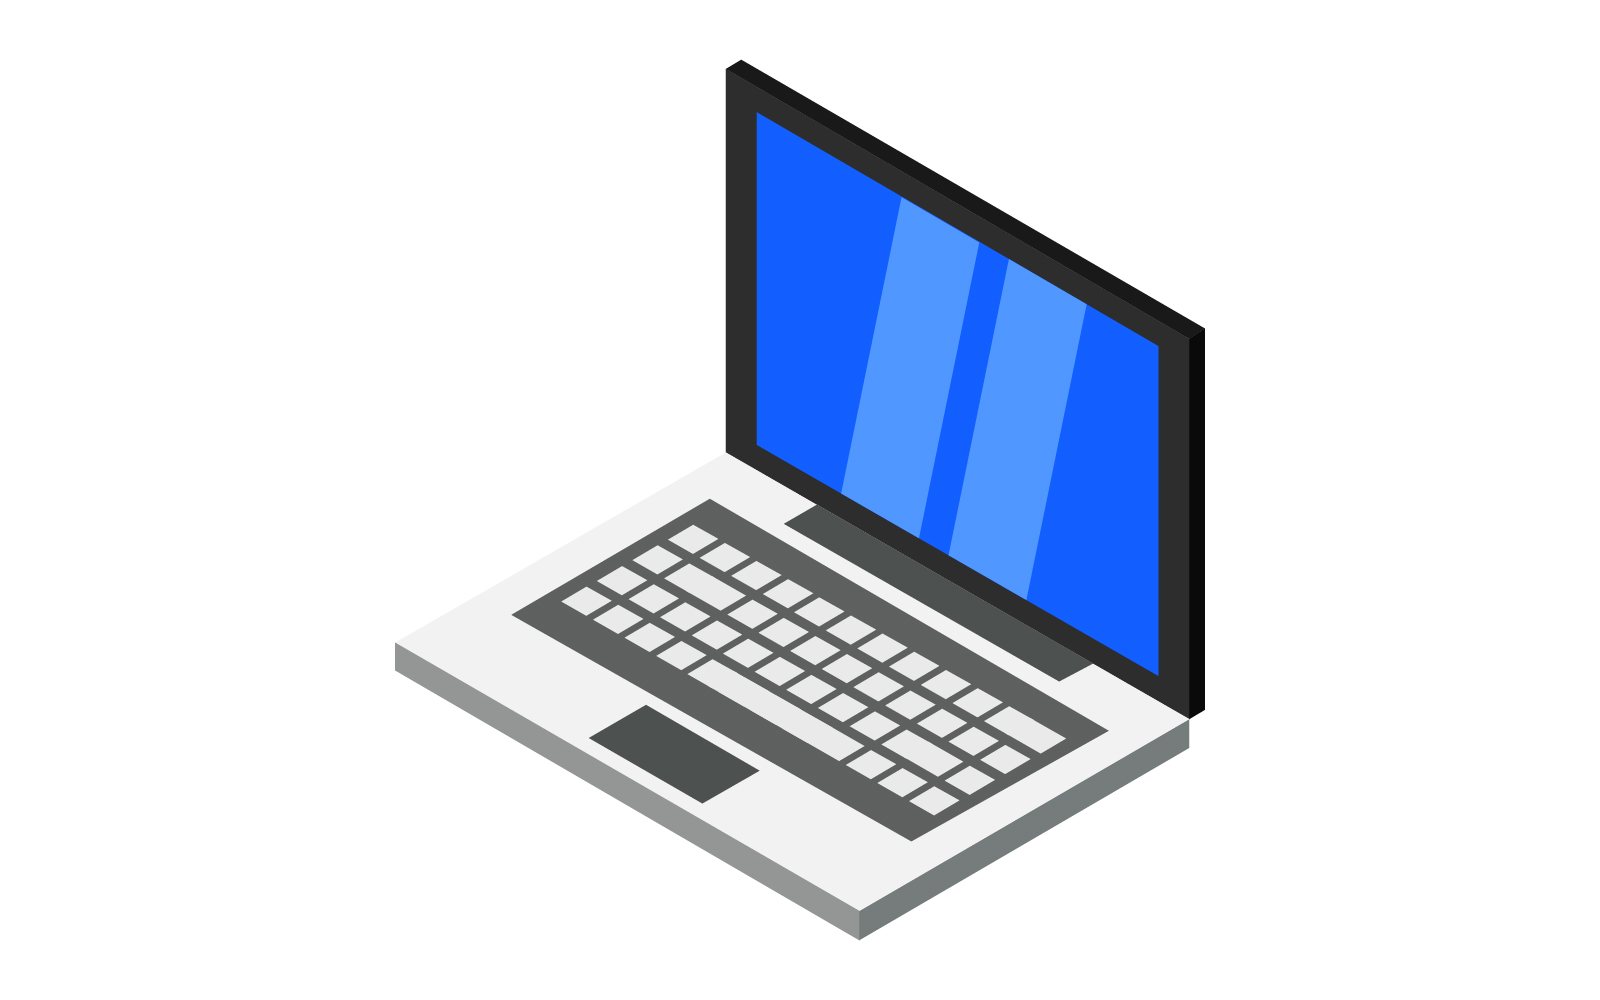 Illustrated and colored laptop on a white background